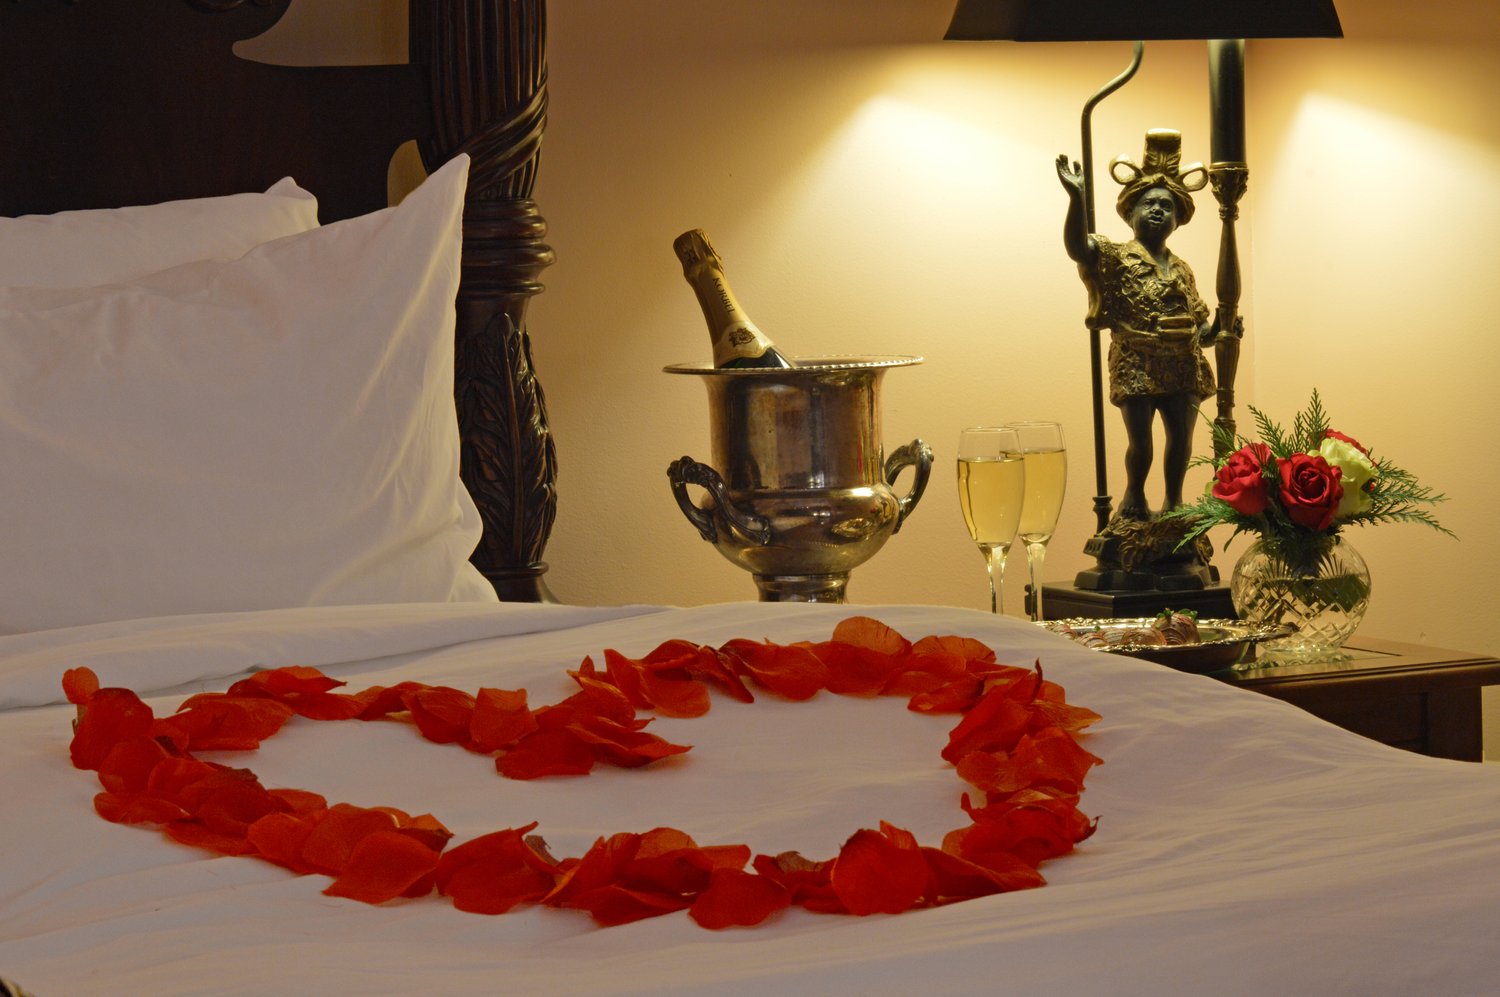 Rose Petals in the shape of a heart laid on a bed with white sheets.